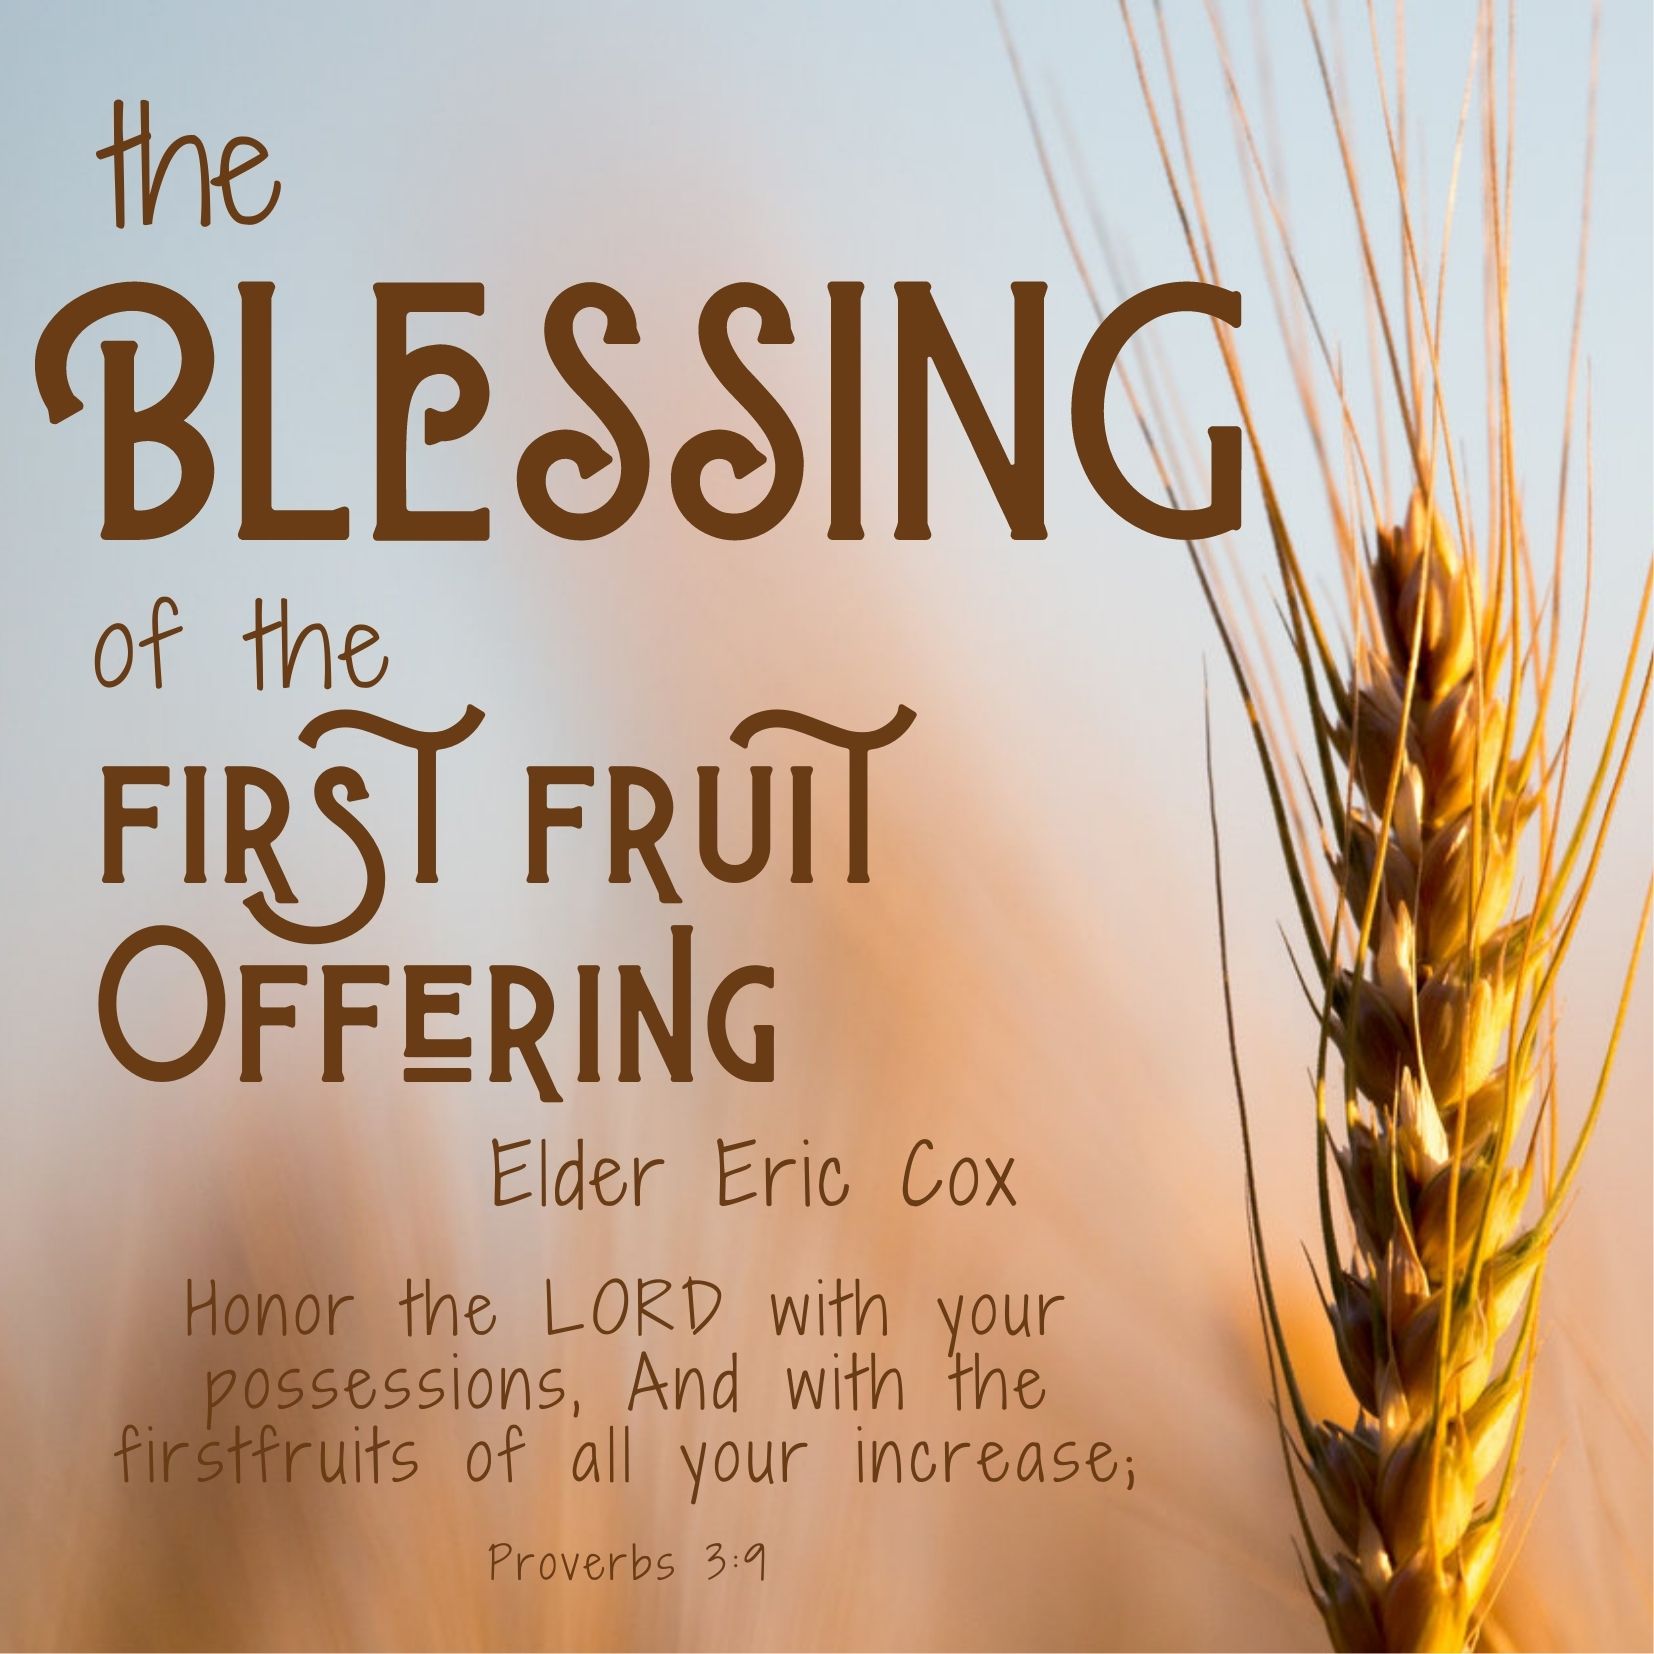 THE BLESSING OF THE FIRST FRUIT OFFERING WITH ELDER ERIC COX